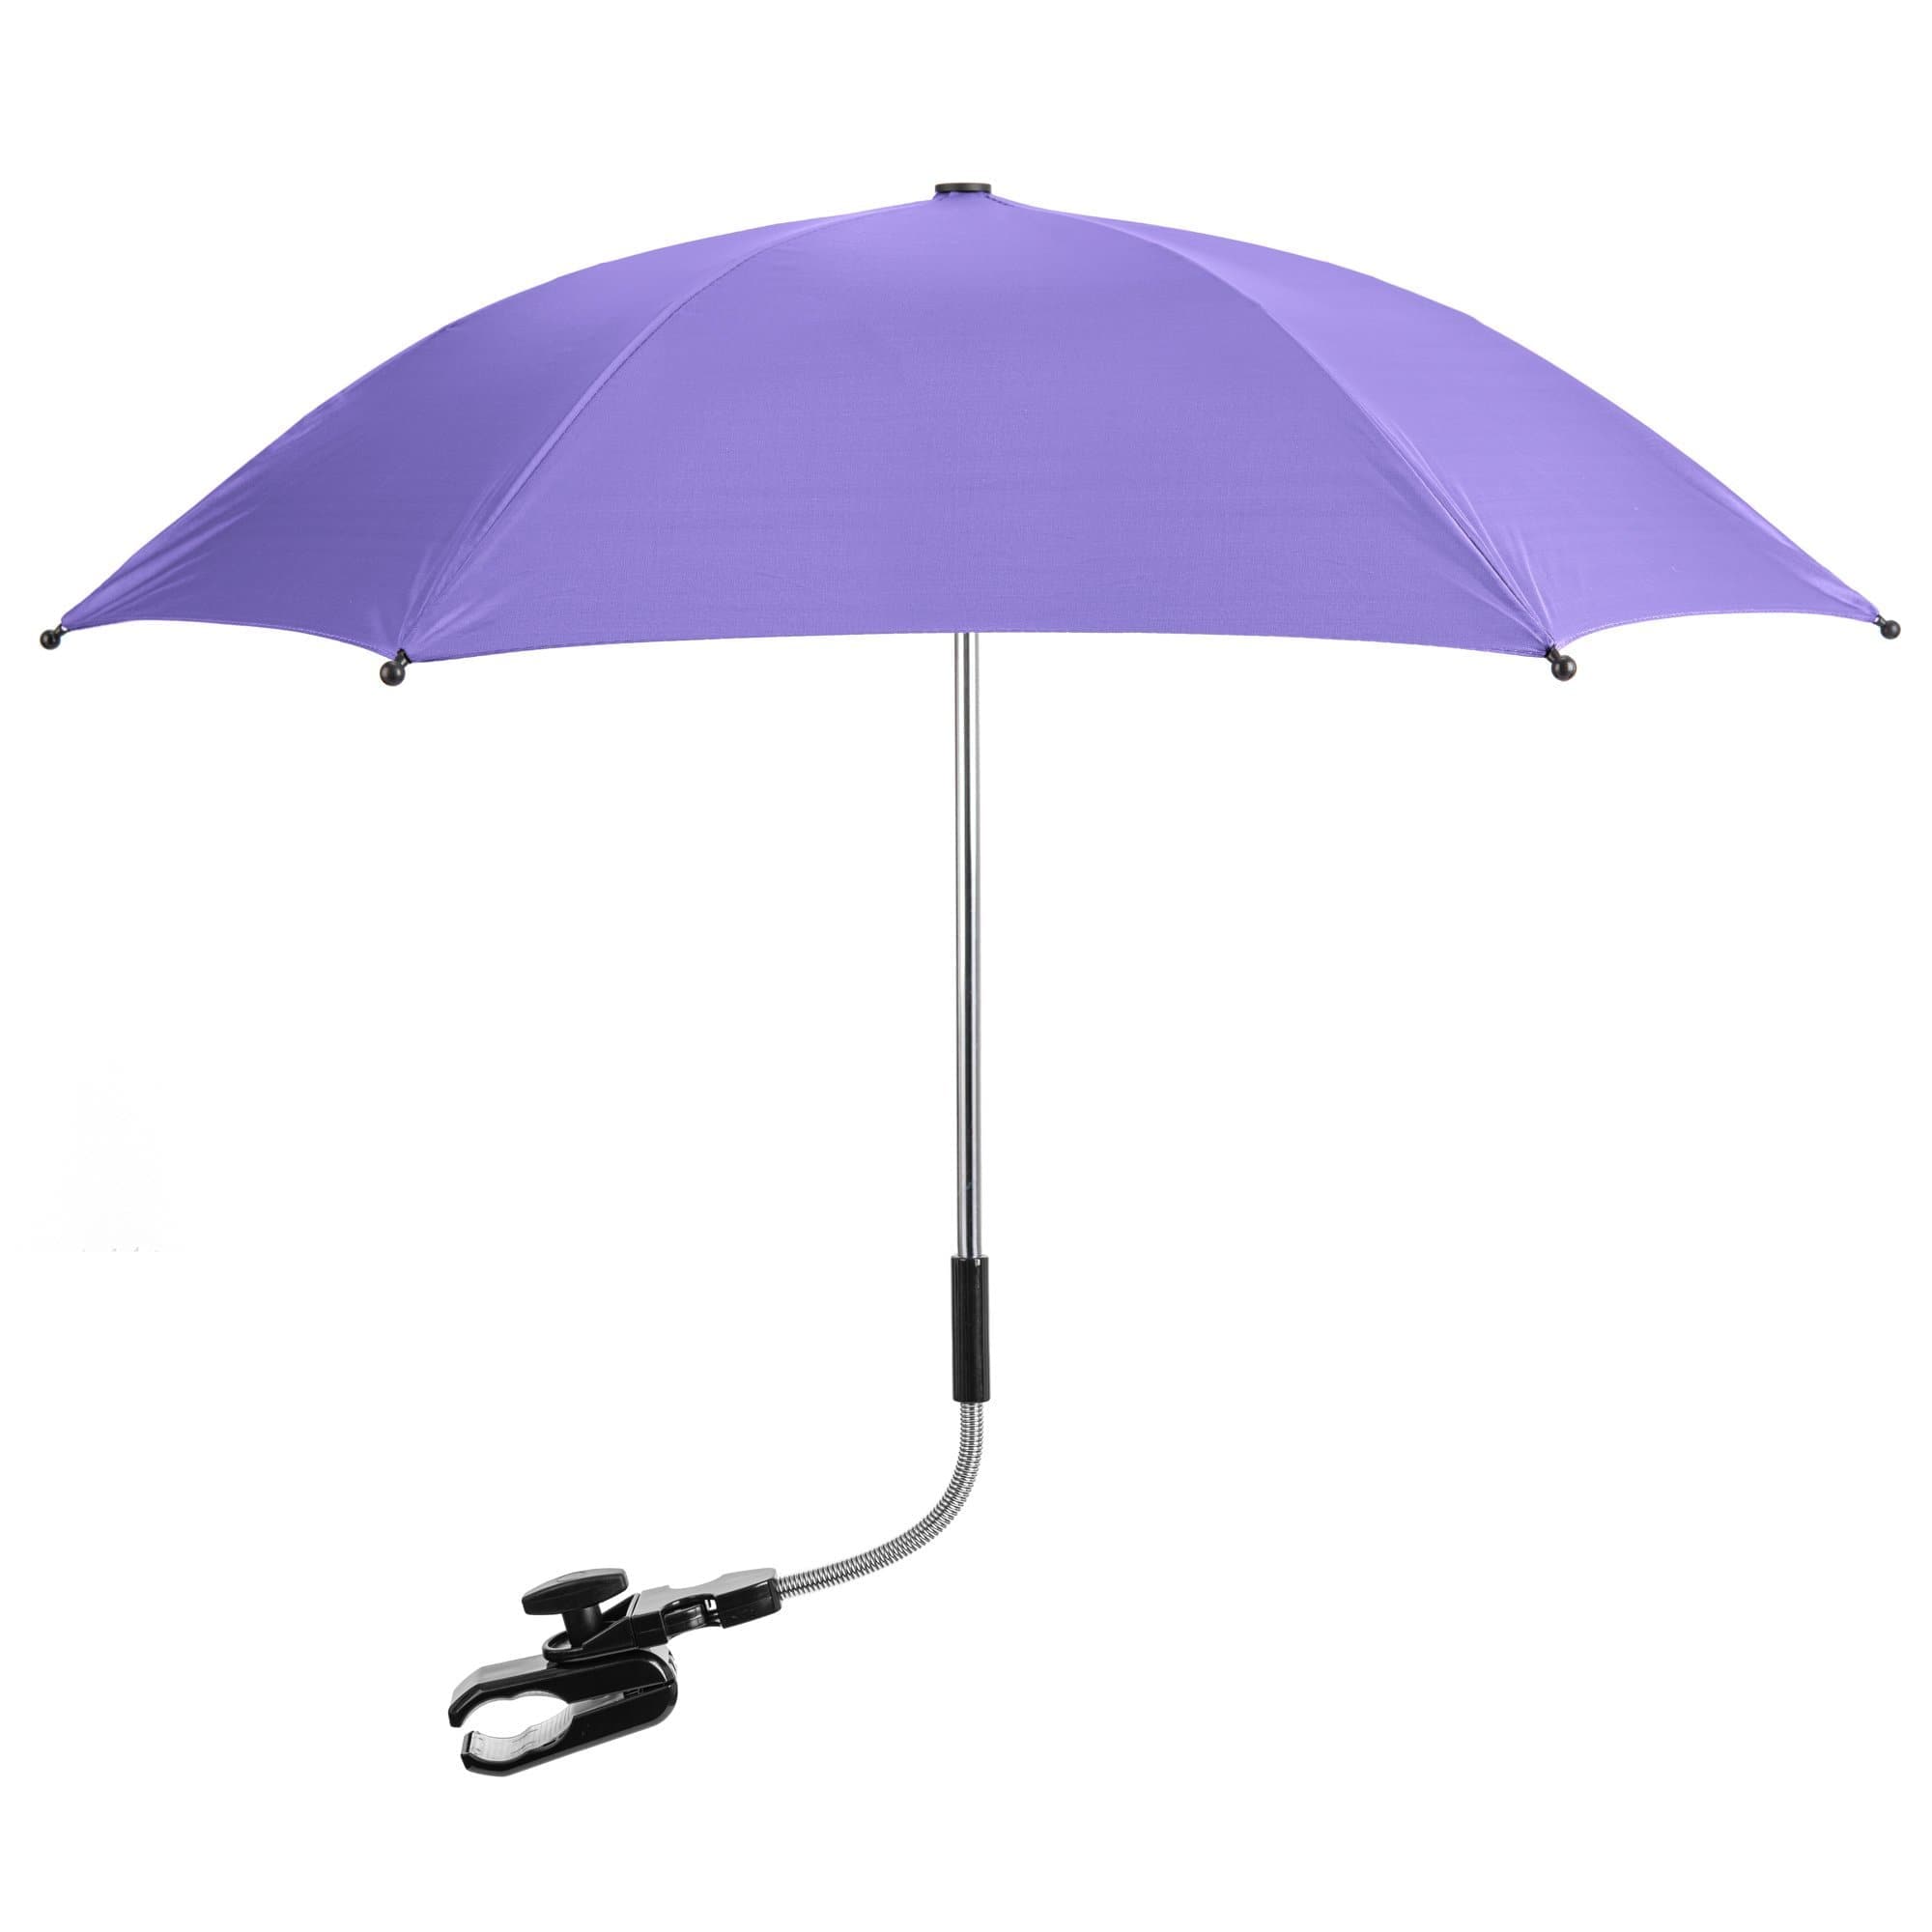 Baby Parasol Compatible With Baby Jogger - Fits All Models - For Your Little One